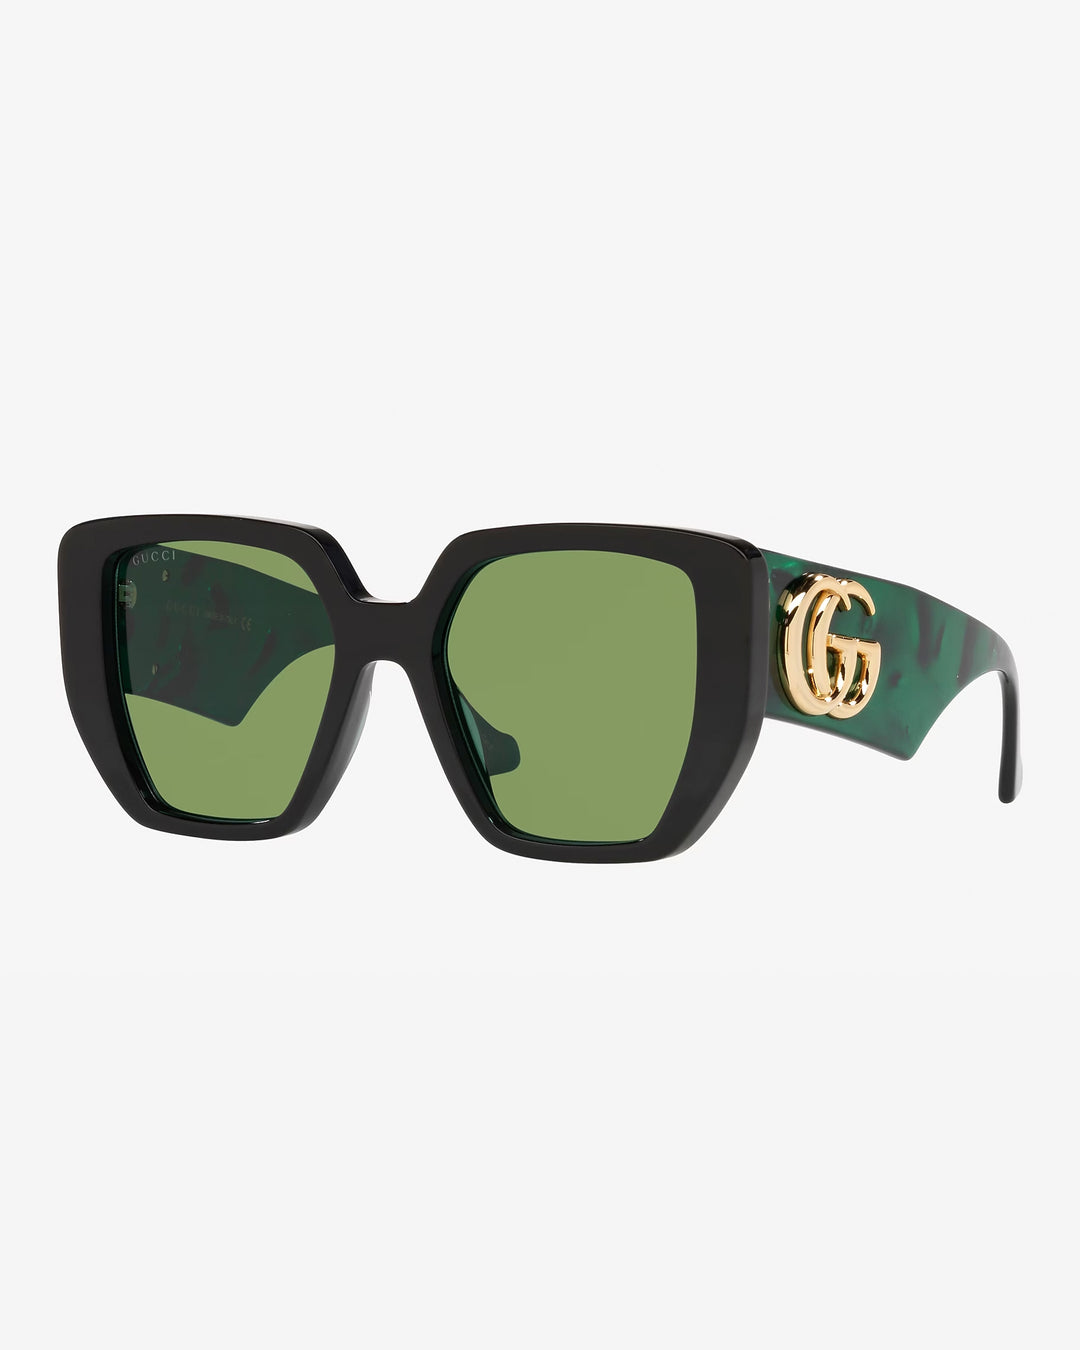 GUCCI OVERSIZED BLACK AND GREEN SUNGLASSES WITH MAXI LOGO